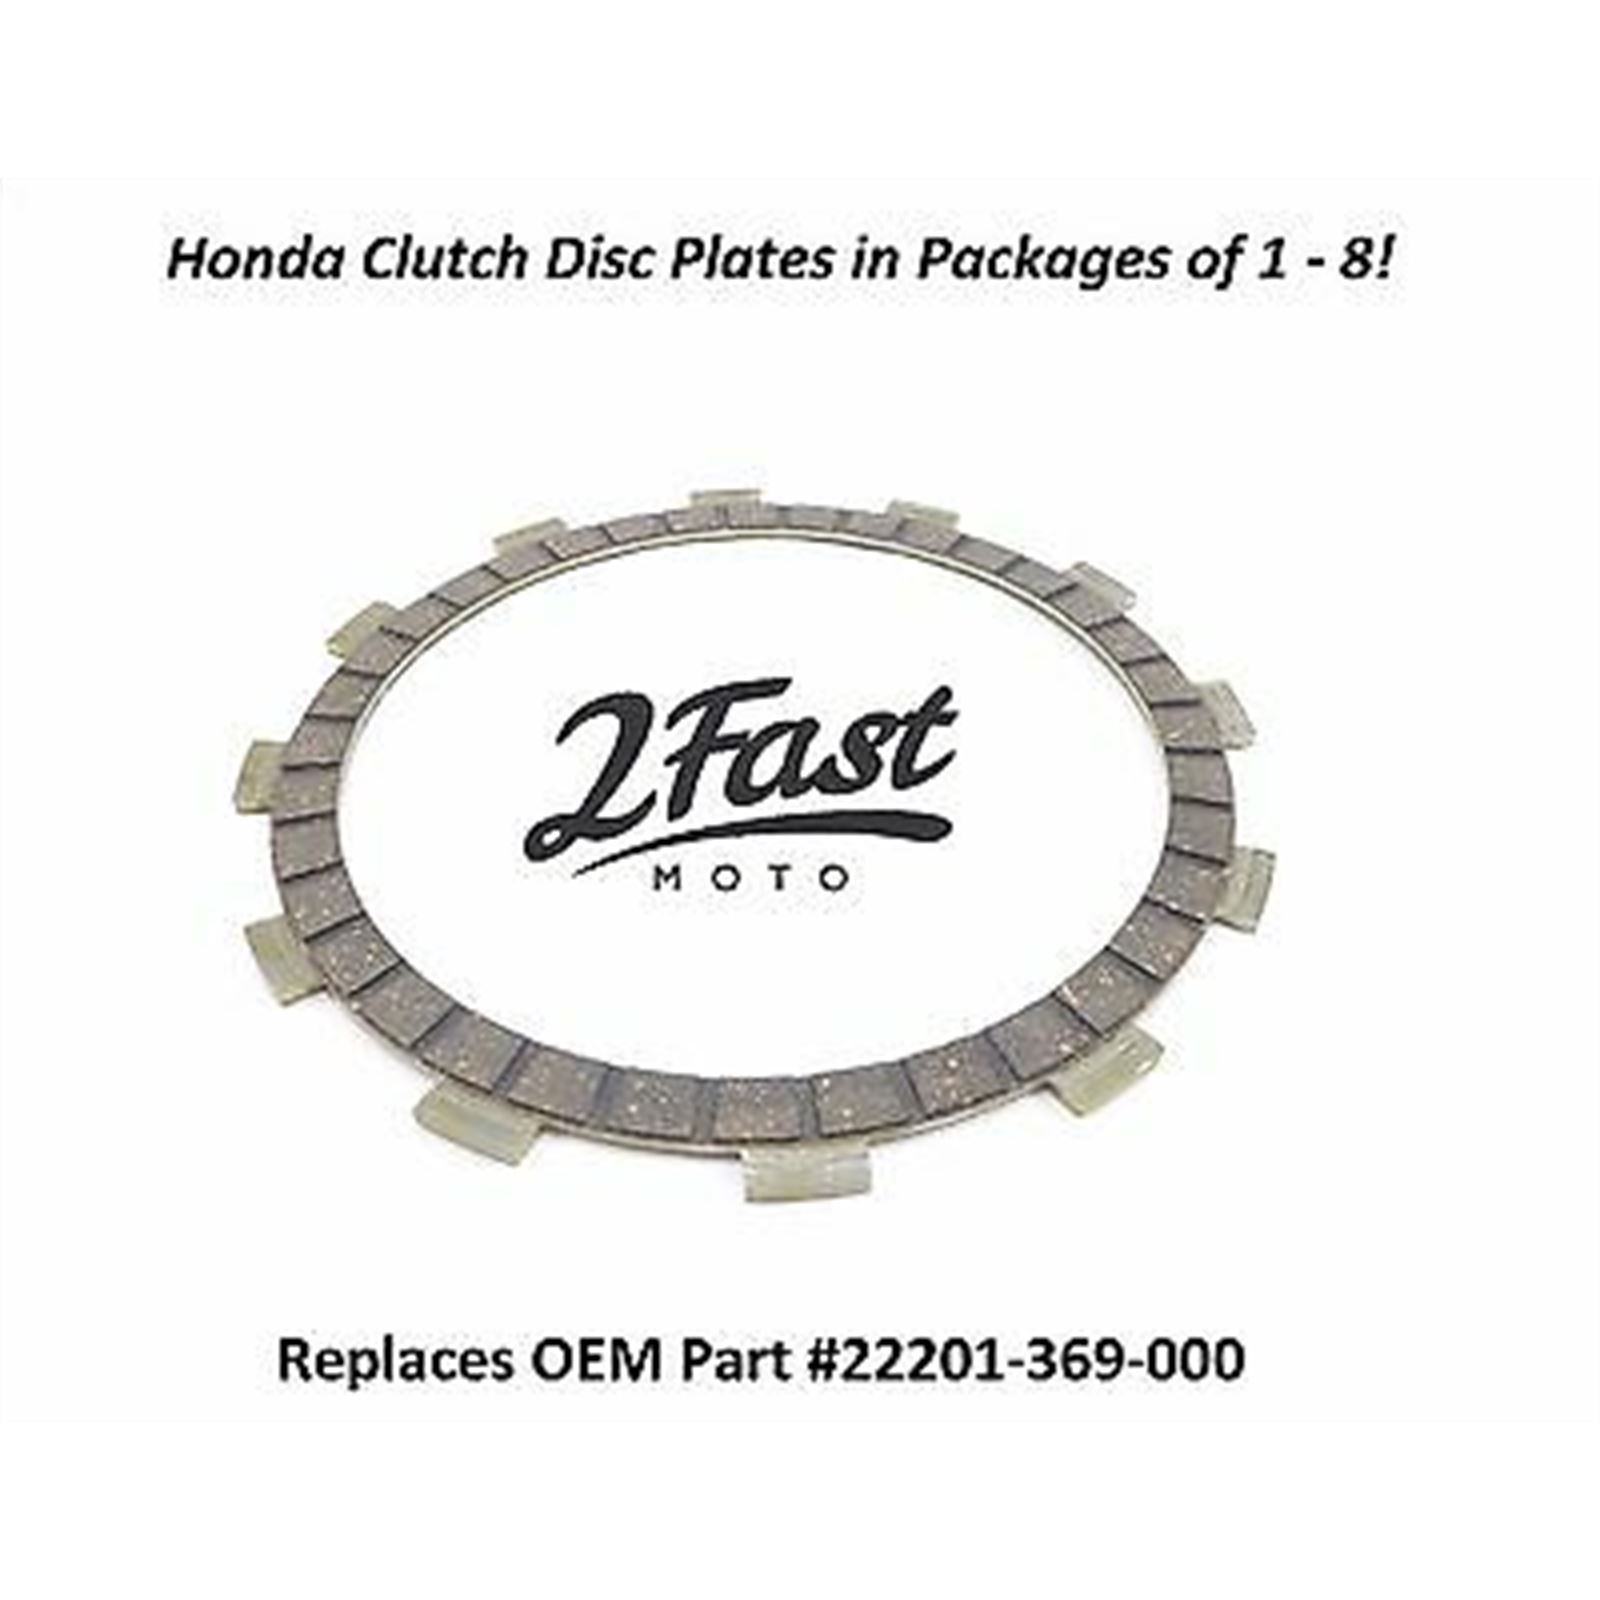 Honda  Steel Clutch Disc Plate 22311-268-000 22311-259-010 Replacement 2FastMoto 